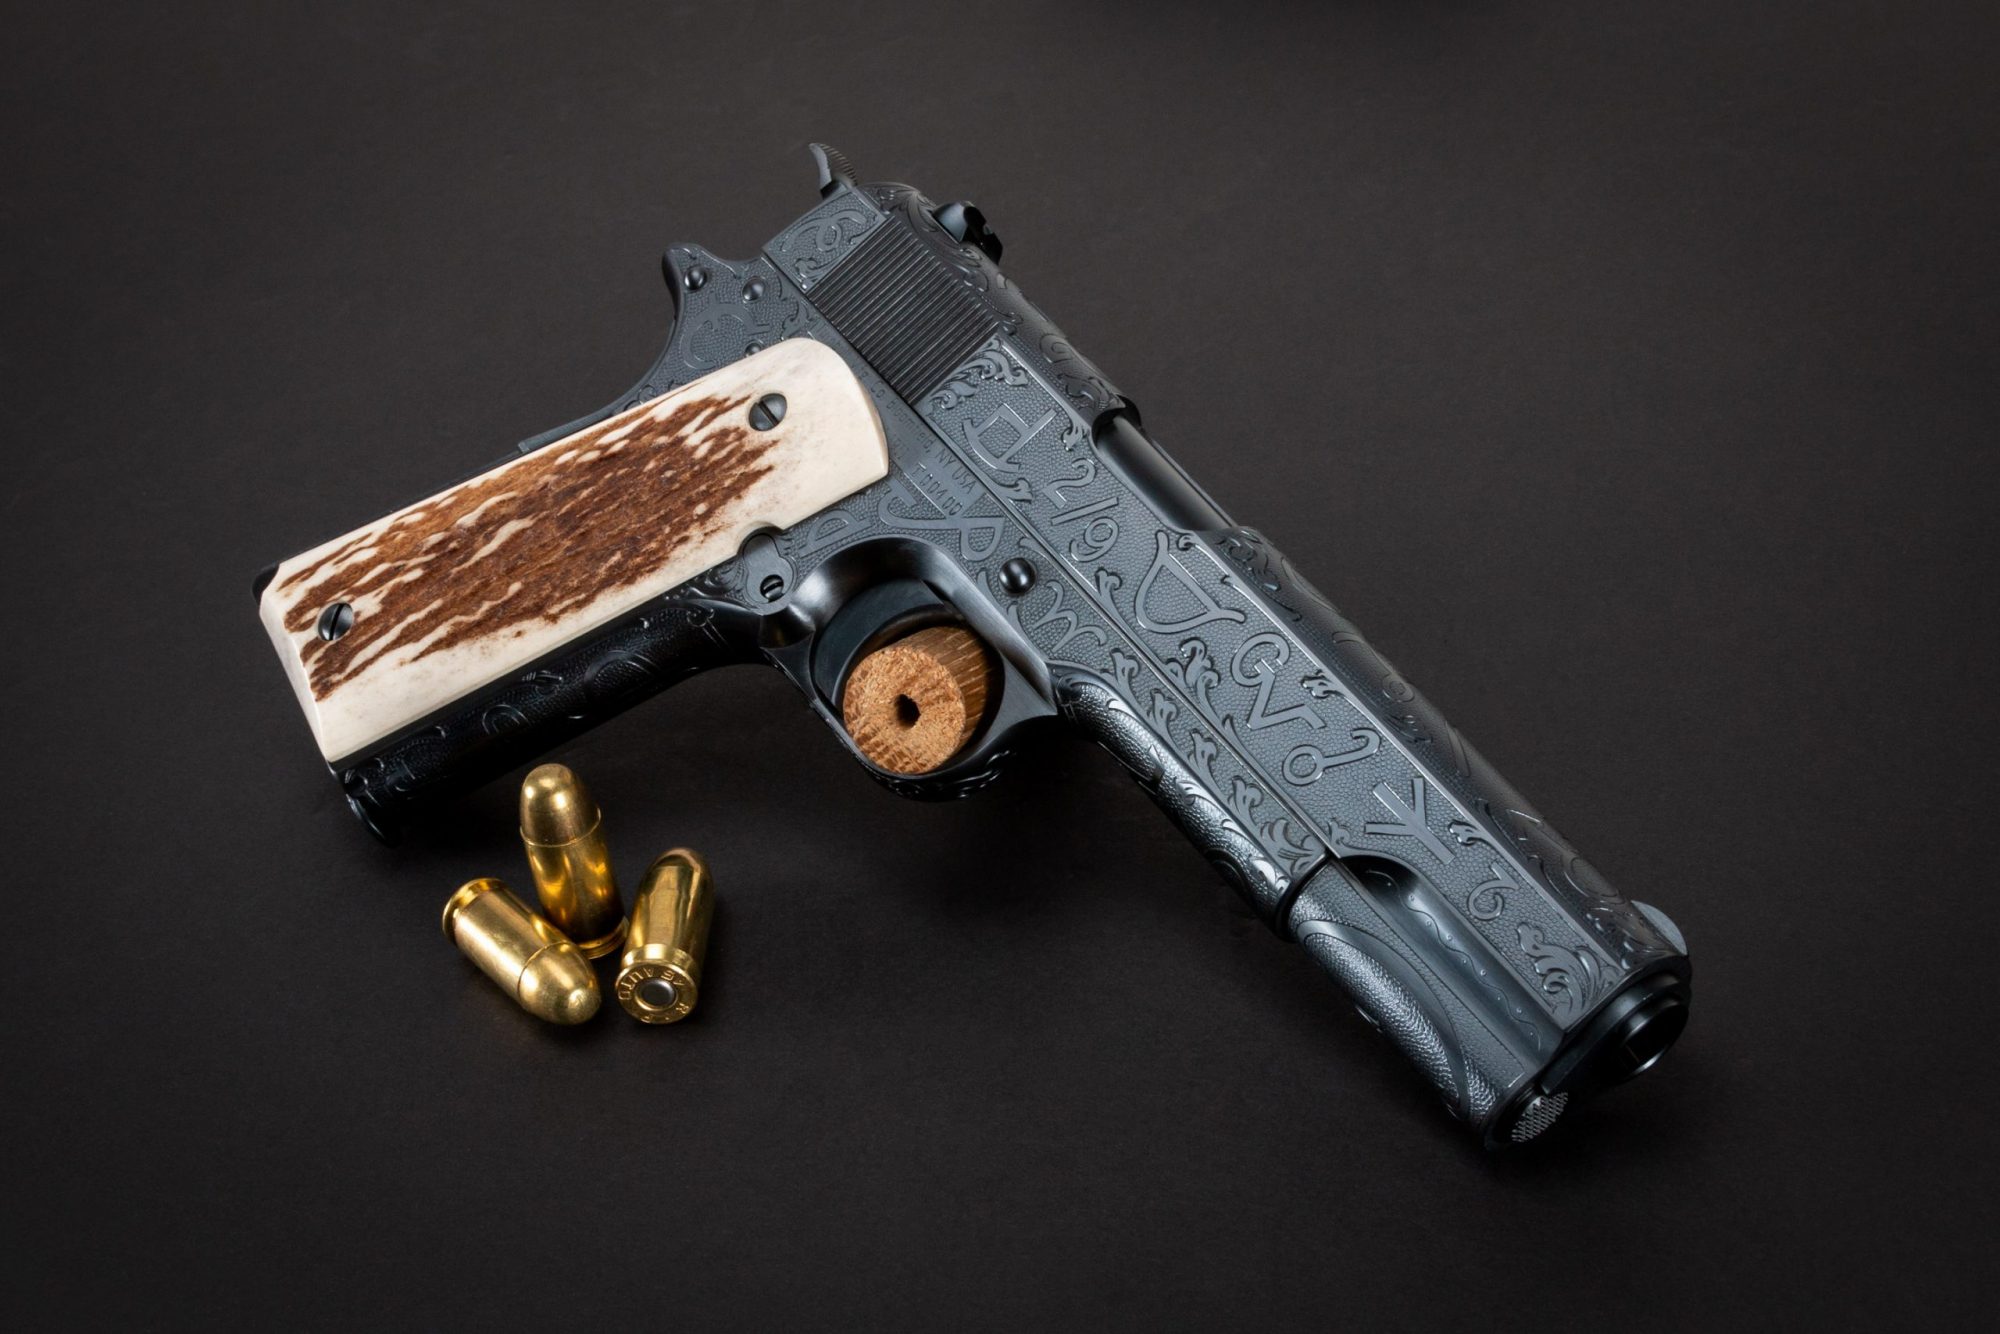 Photo of a Turnbull Restoration Model 1911, featuring cattle brand engraving and hand-fit elk grips